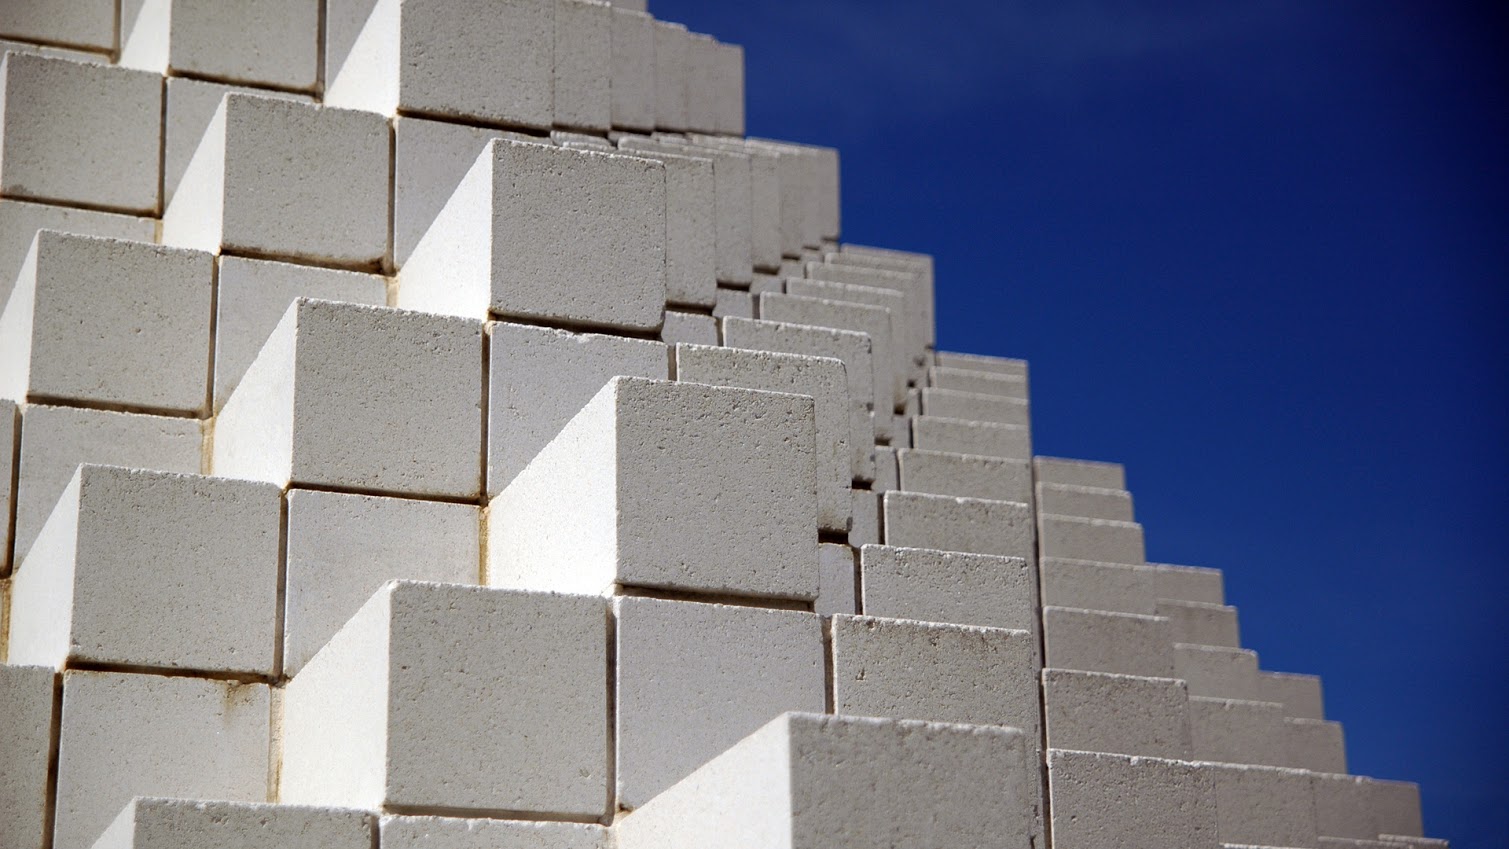 Foam blocks have high frost resistance, low thermal conductivity and good noise insulation